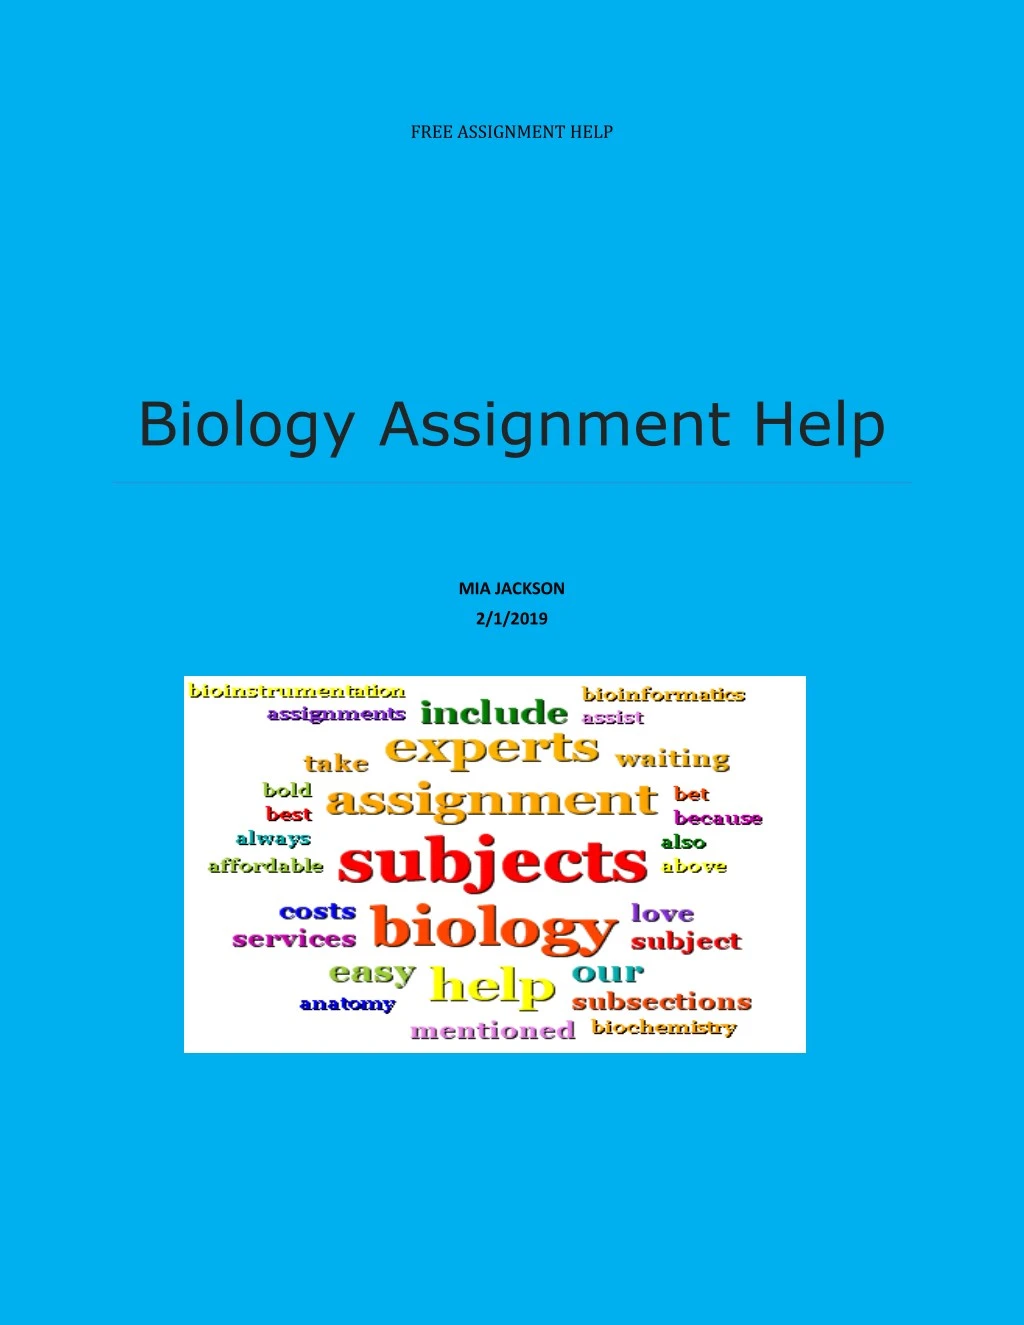 free assignment help